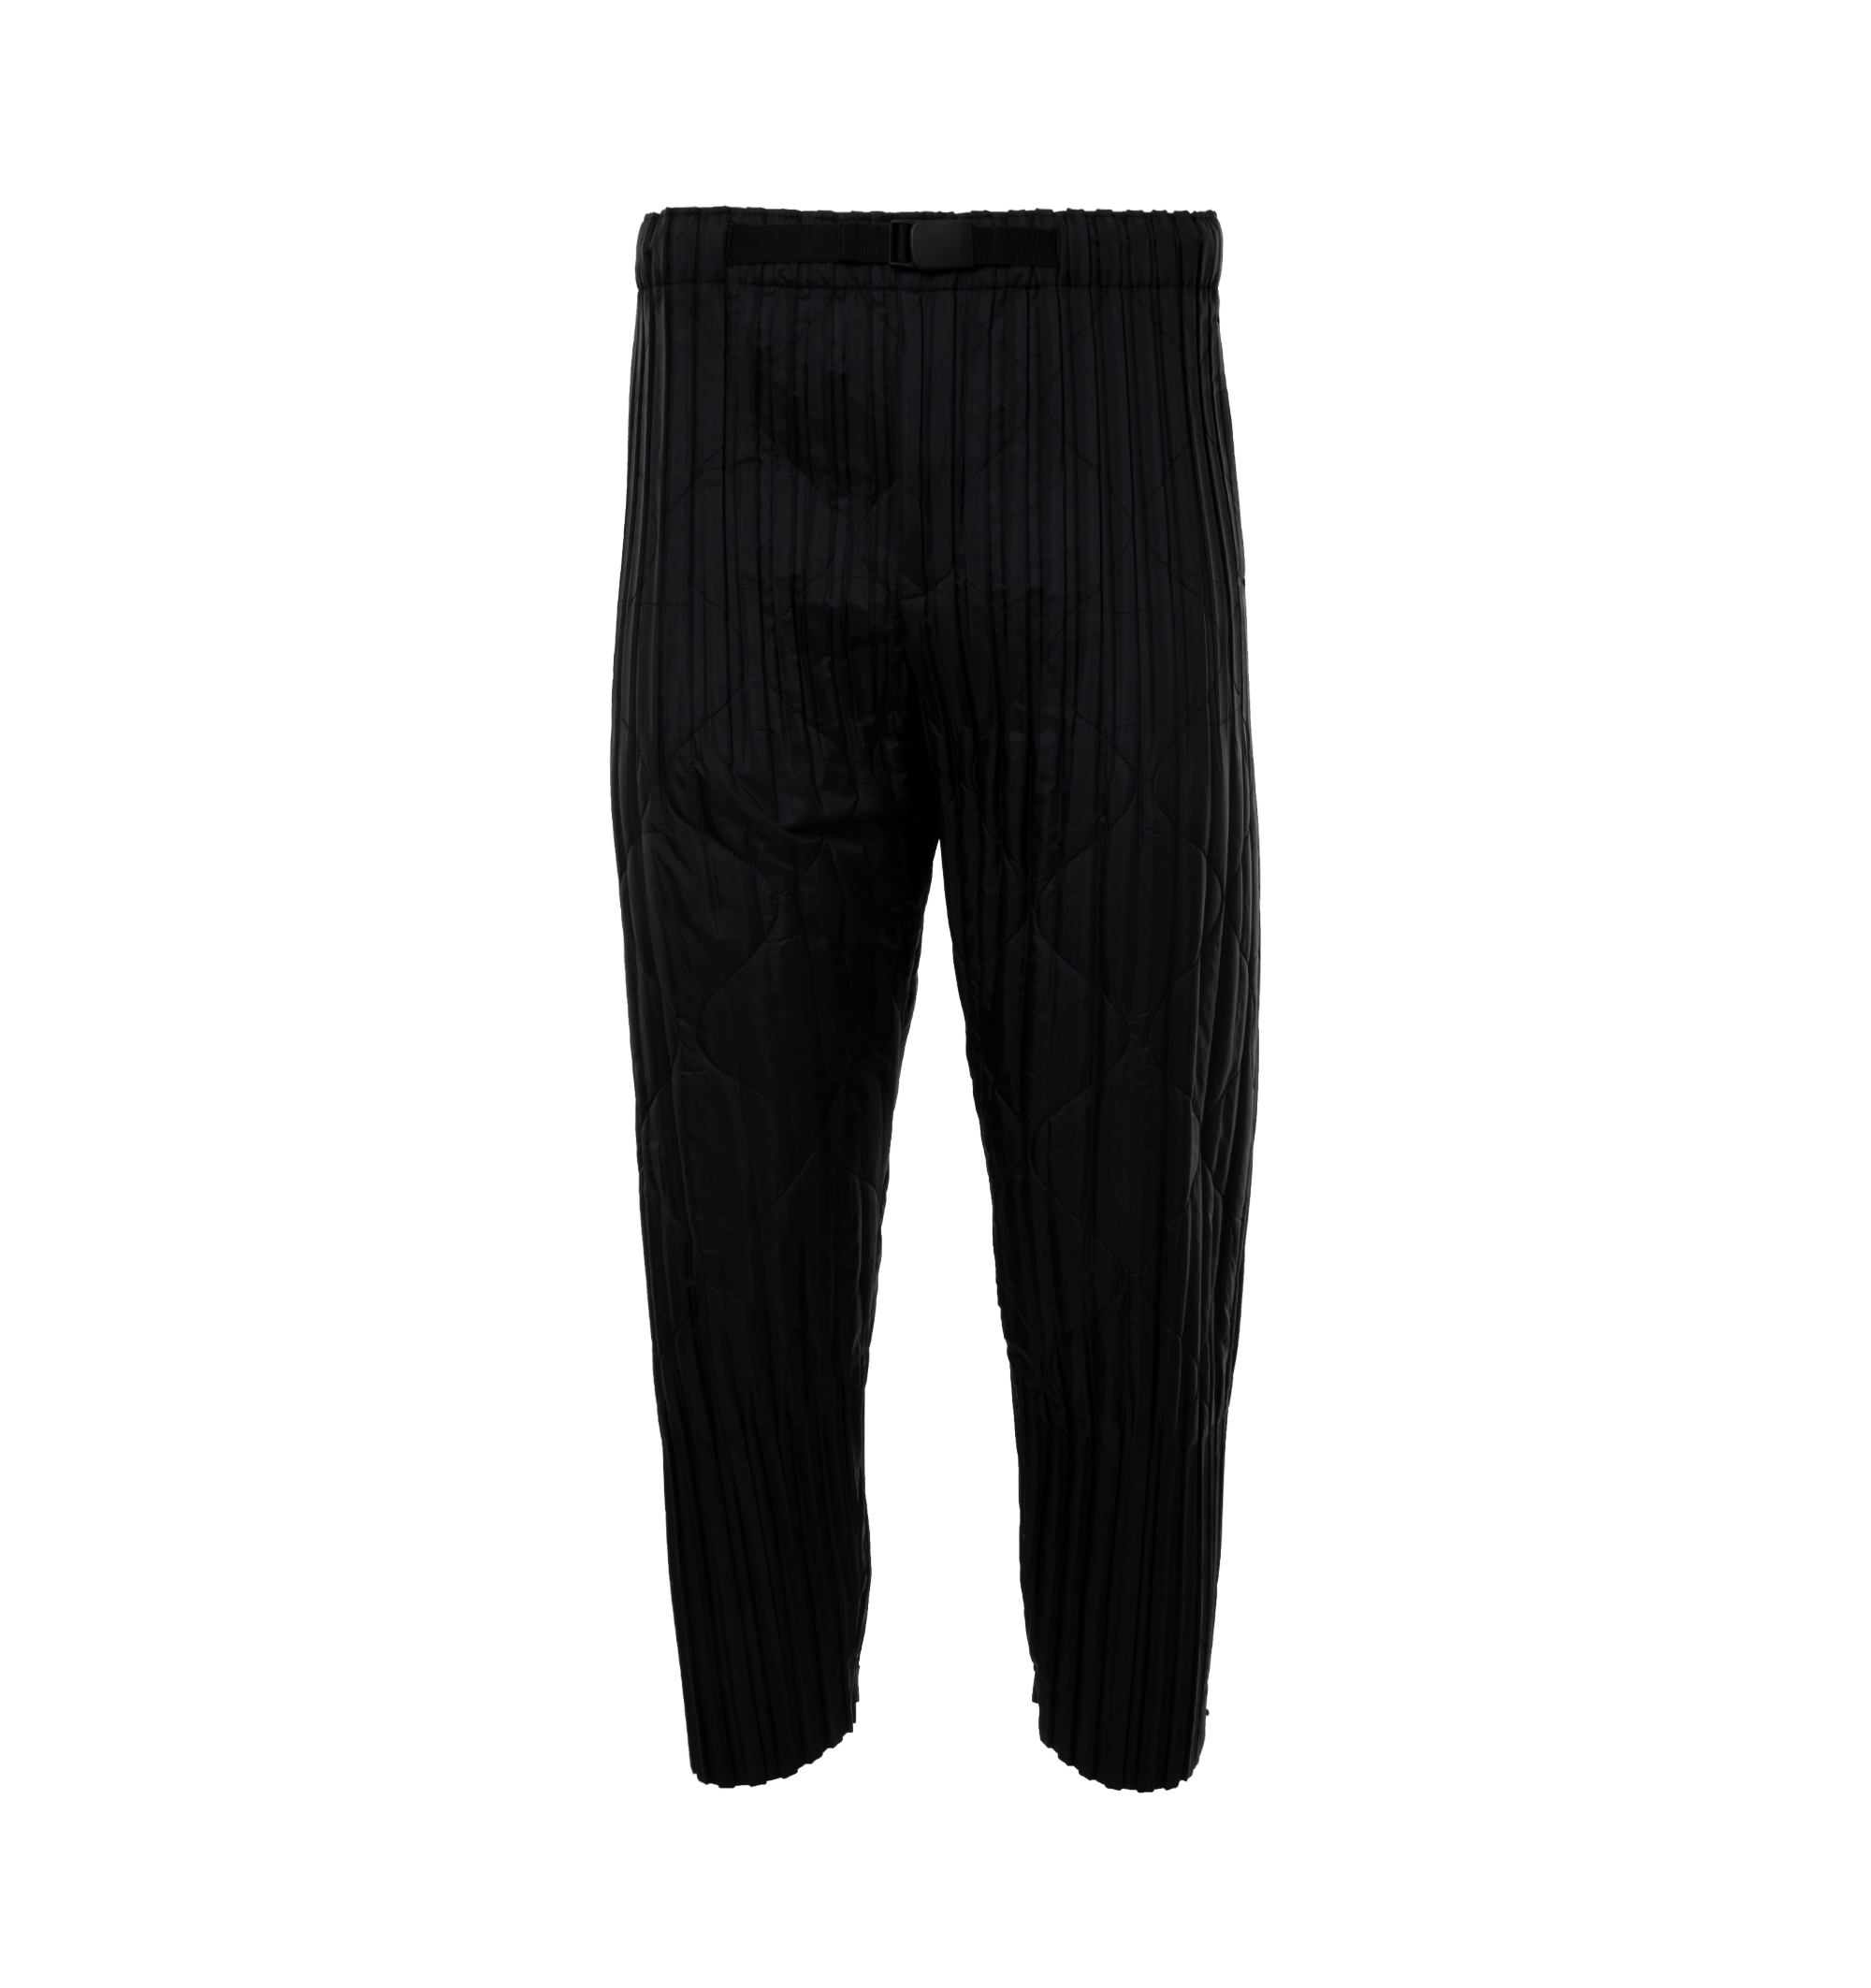 PADDED PLEATS PANTS  The official ISSEY MIYAKE ONLINE STORE